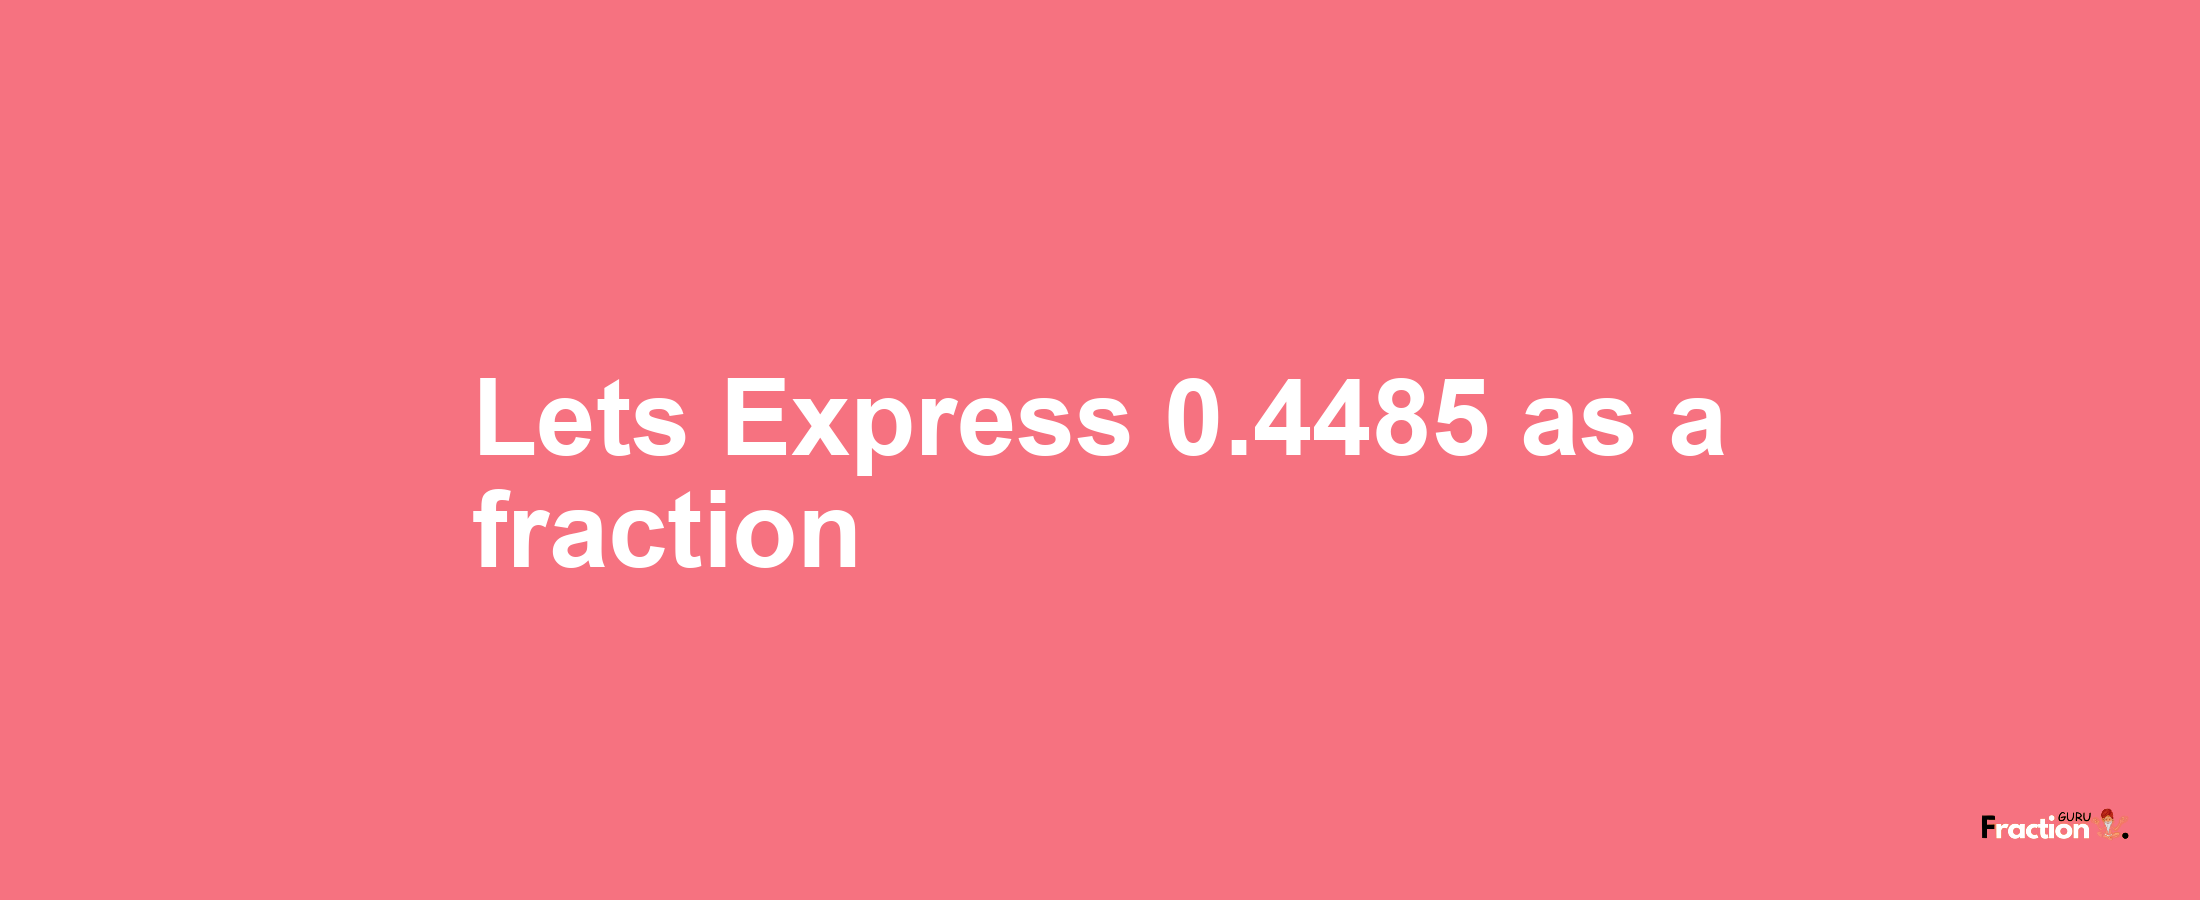 Lets Express 0.4485 as afraction